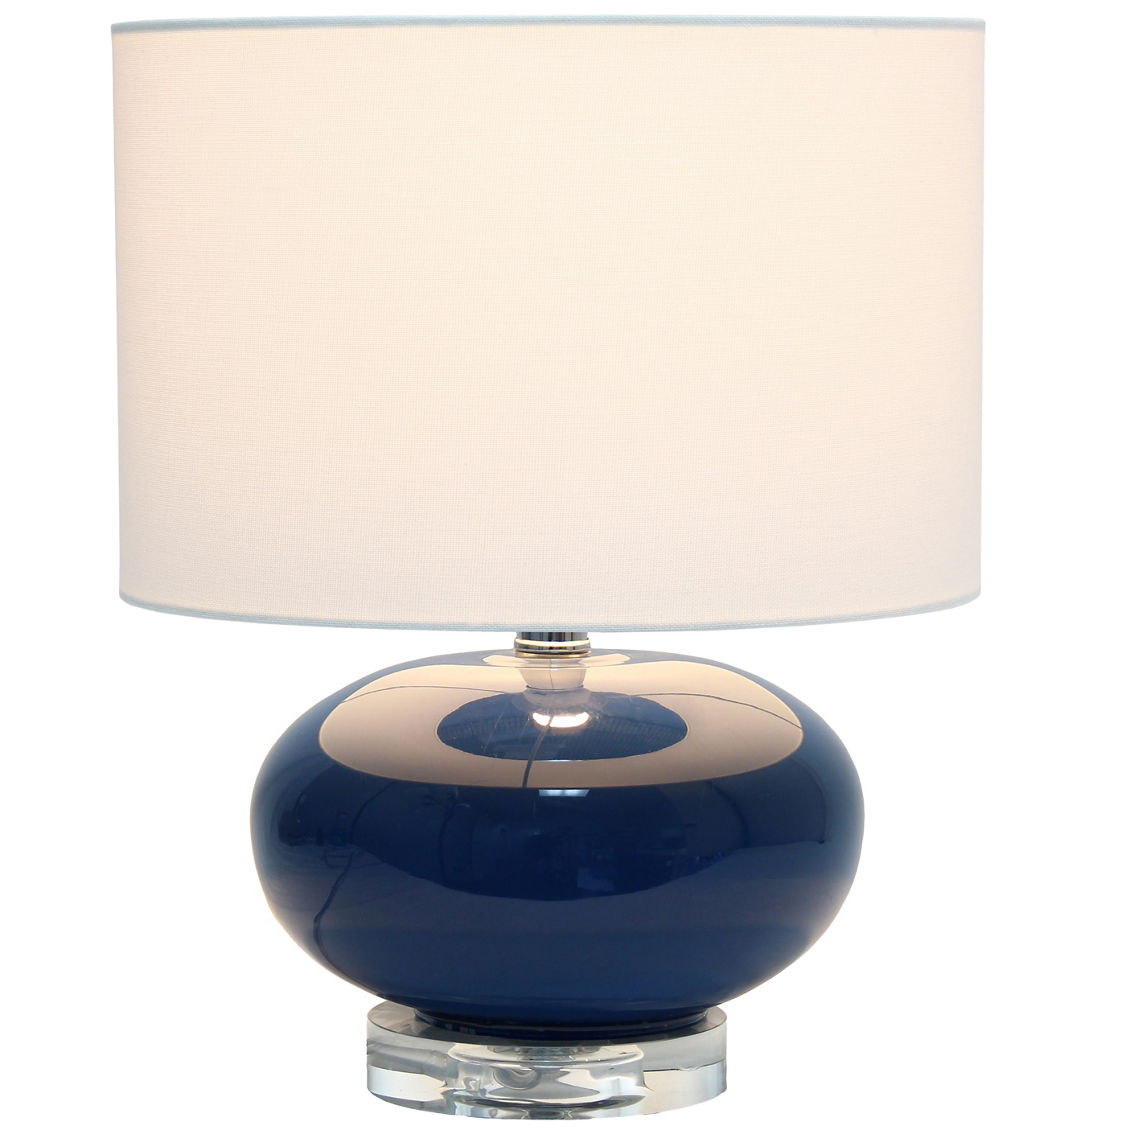 Lalia Home Modern Ovaloid Glass Bedside Table Lamp - Image 2 of 10